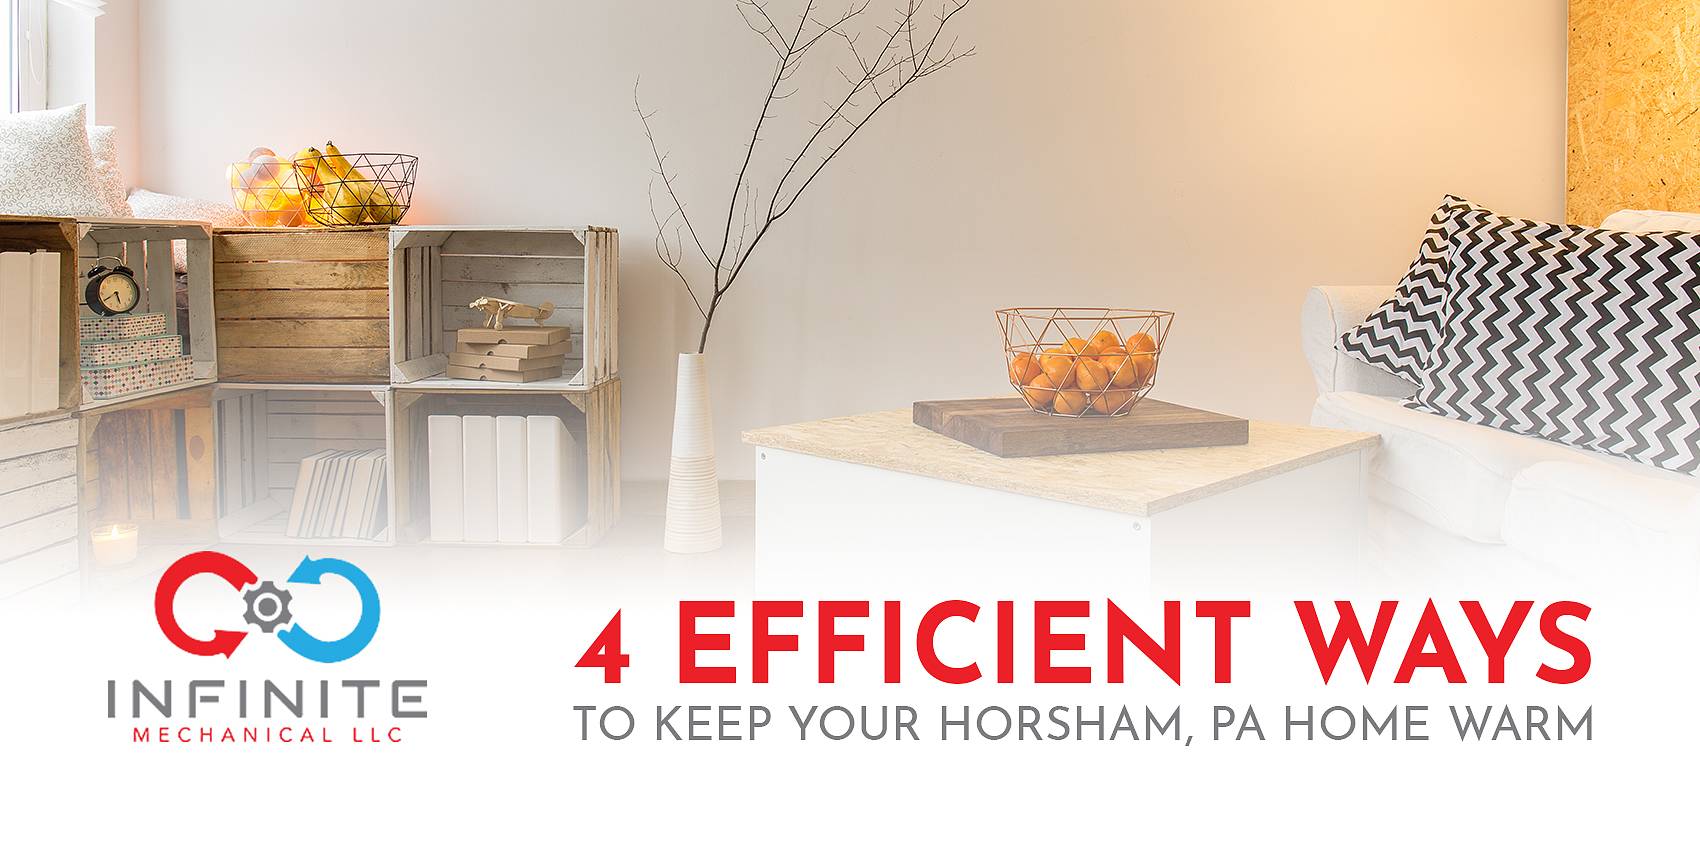 4 Efficient Ways to Keep Your Horsham, PA Home Warm